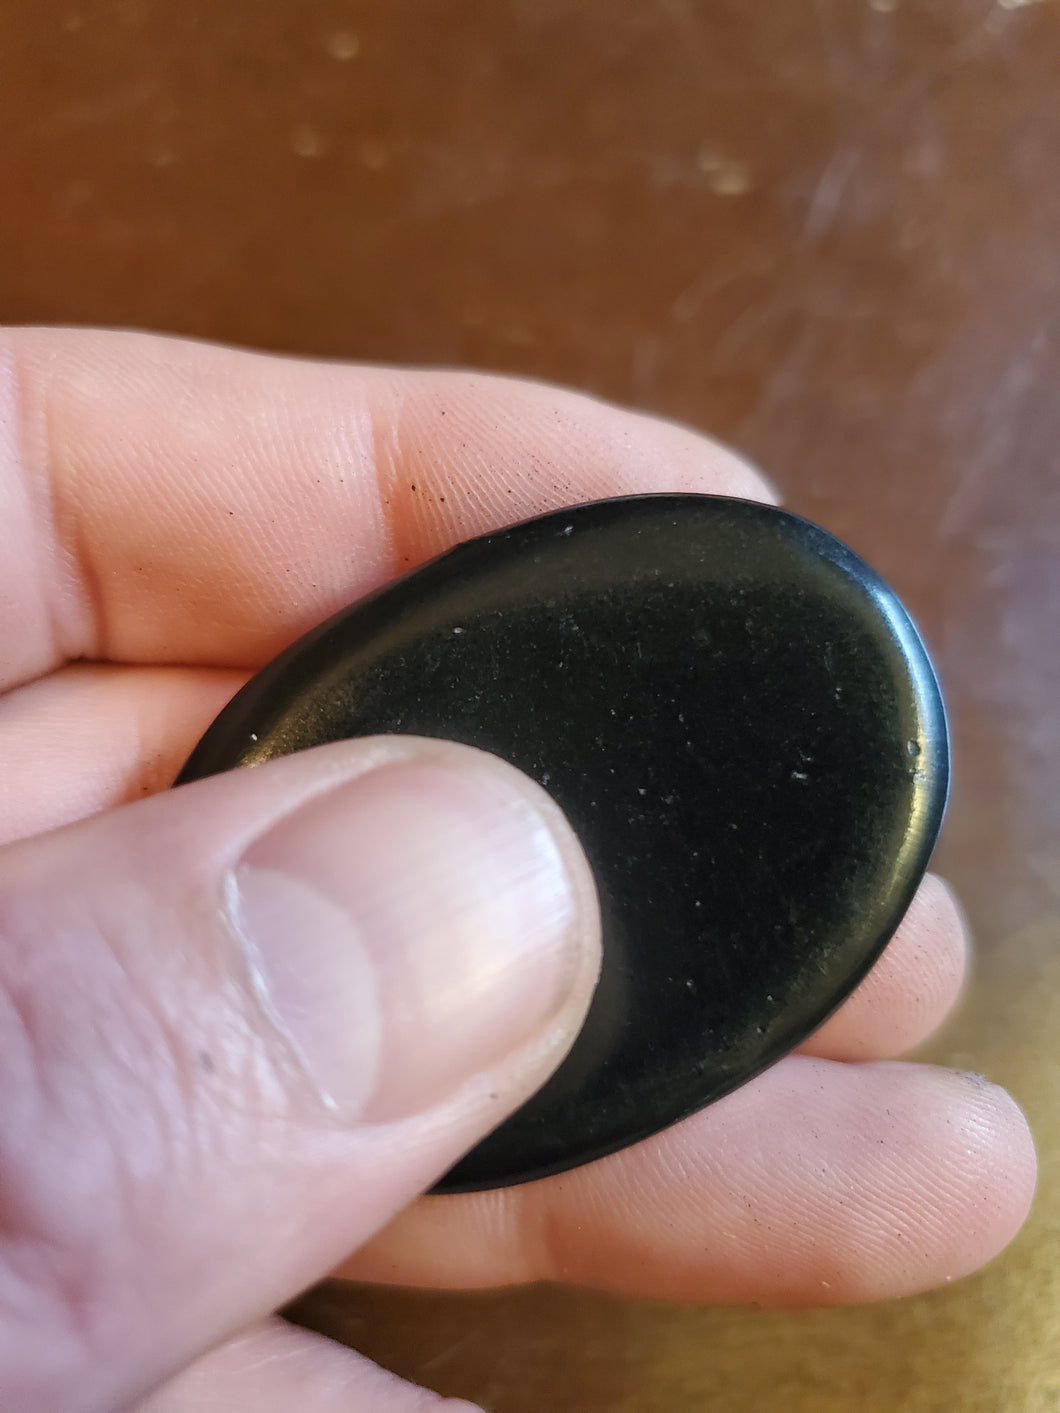 Shungite is a black stone with properties helping one who requires assistance in cleansing, healing, purification of the mind, body, and soul. First discovered from a deposit in remote Russia and is a carbon filled stone. Shungite is said to kills bacteria and viruses. 